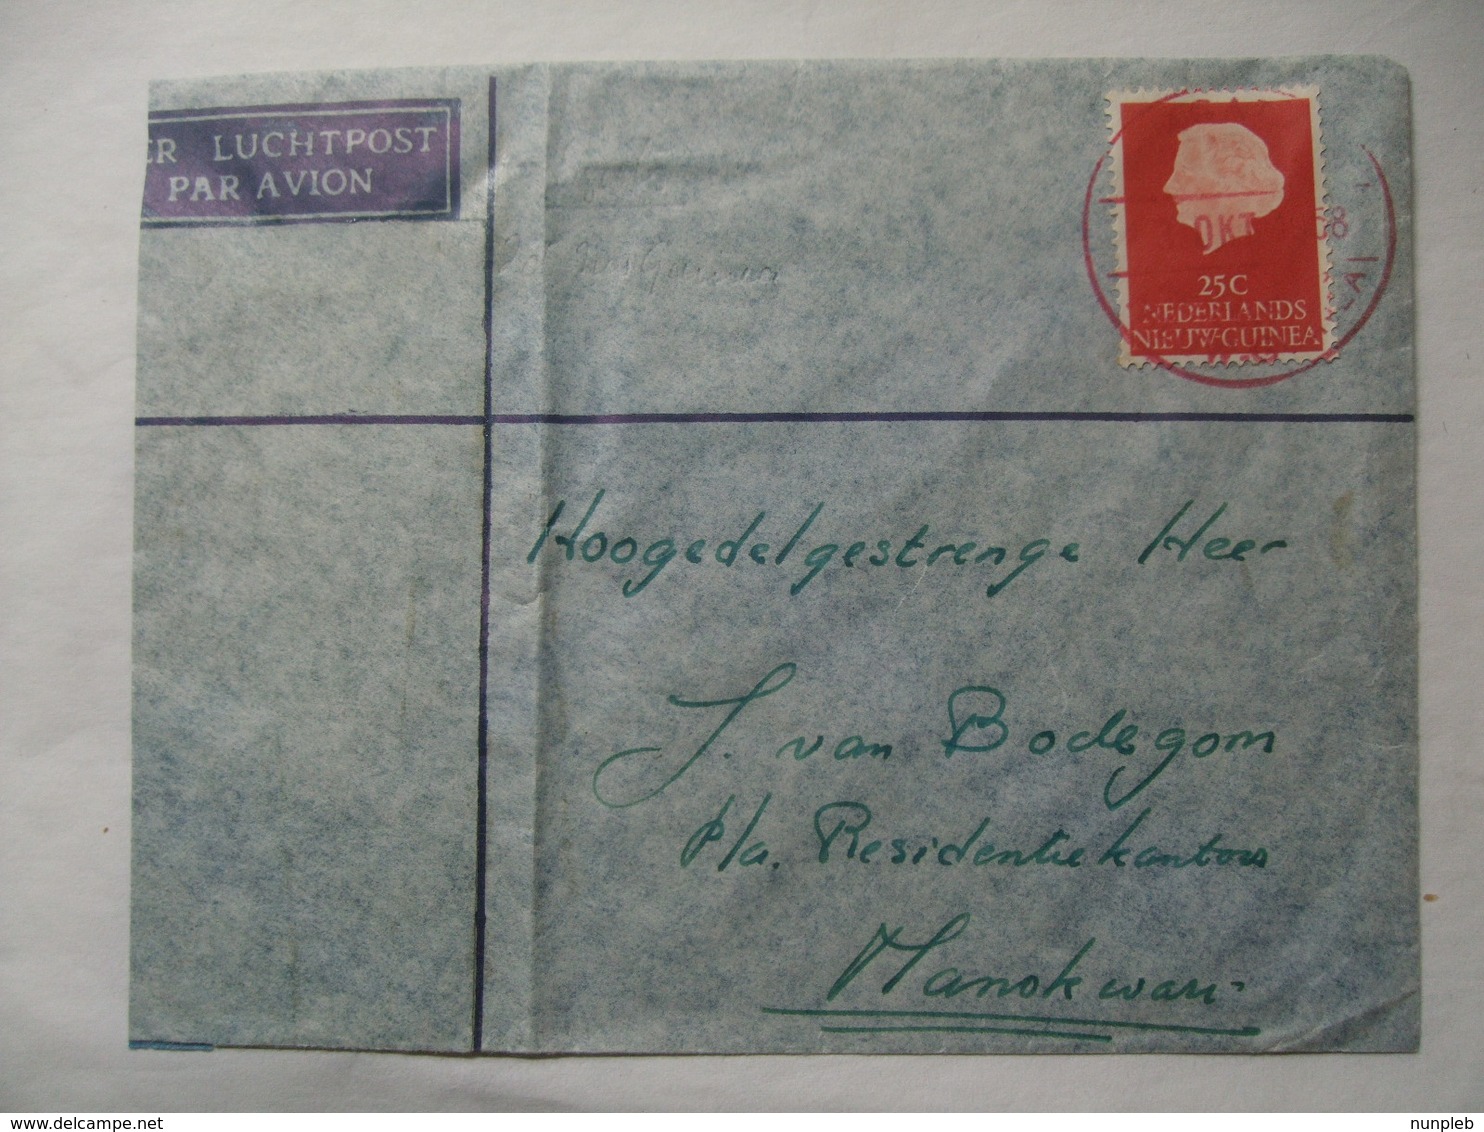 Netherlands New Guinea Cover With Rare Agats Postmark Air Mail Sent To Manokwari - Netherlands New Guinea